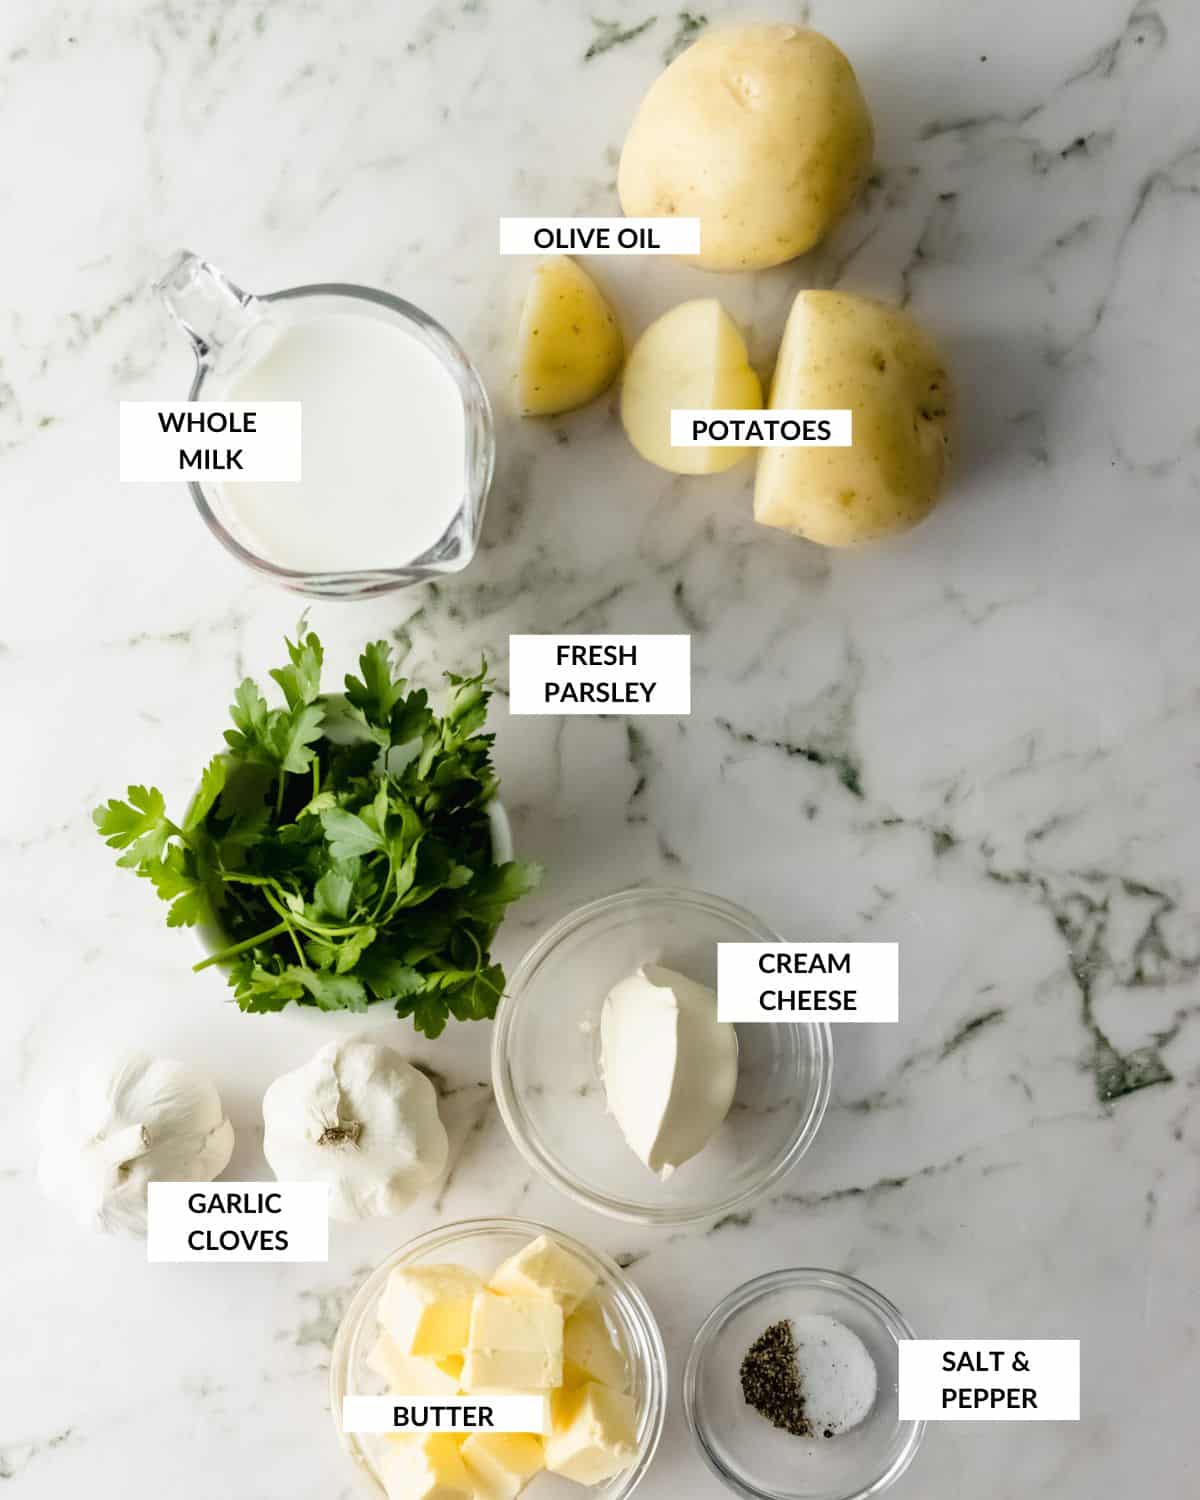 Labeled ingredients for making Instant Pot mashed potatoes.